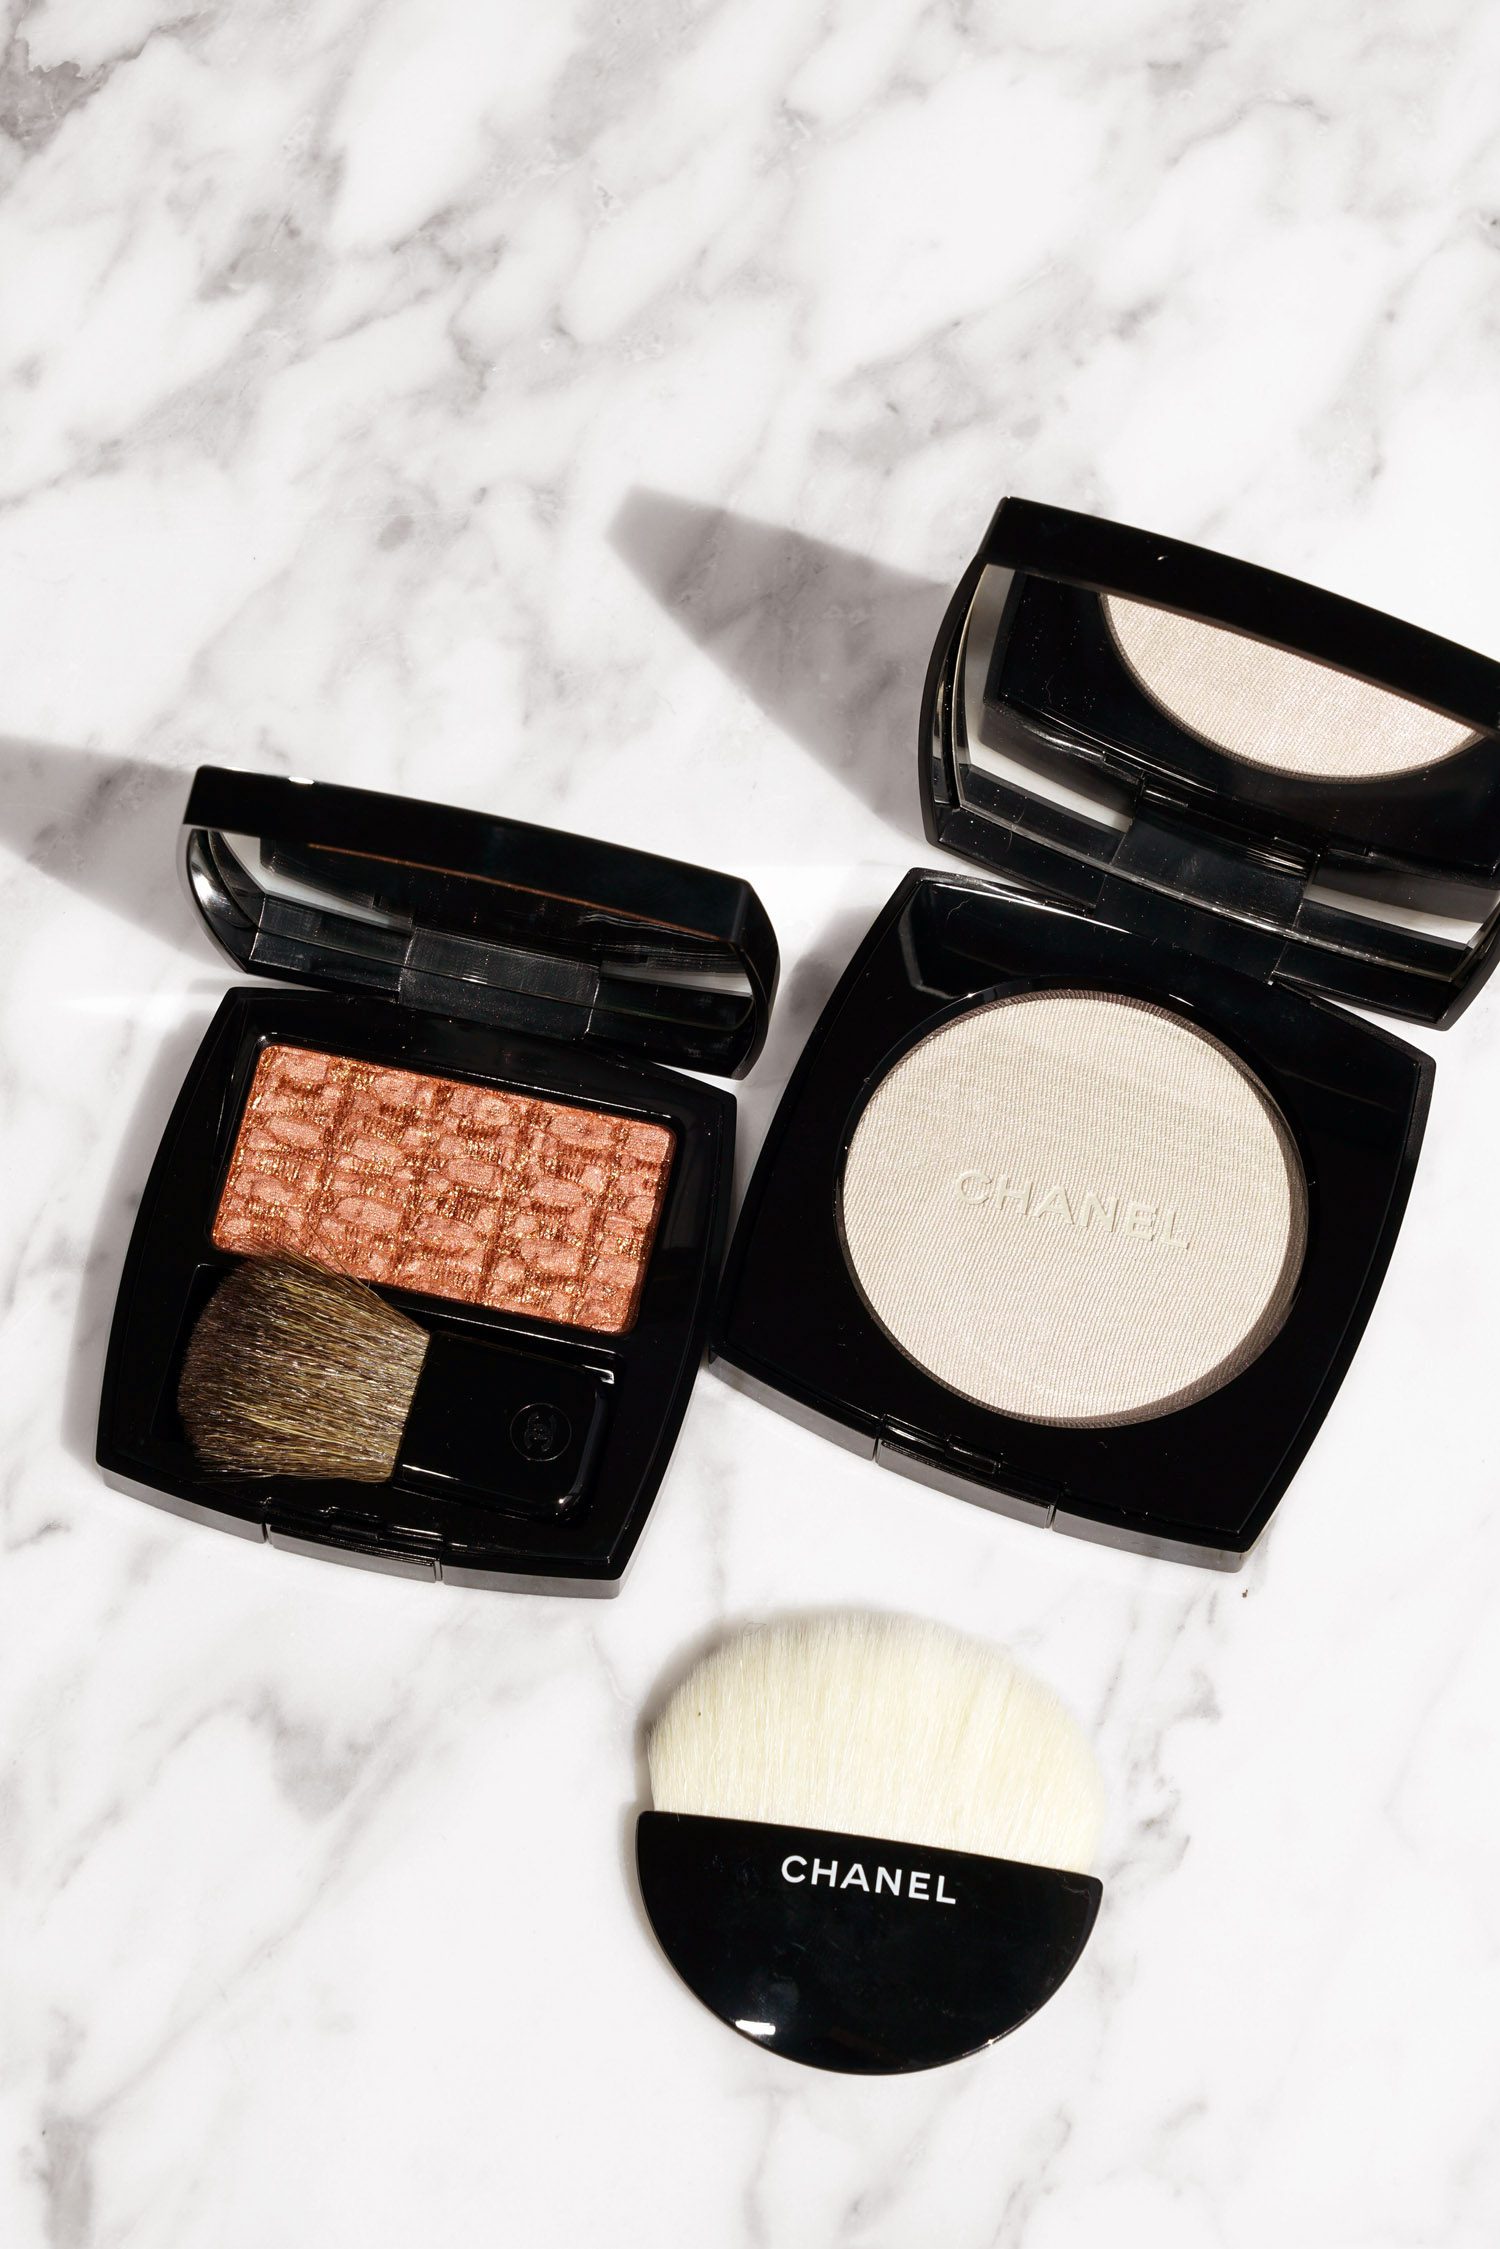 Chanel Poudre Signee de Chanel Illuminating Powder Spring 2013 Review &  Swatches - Musings of a Muse